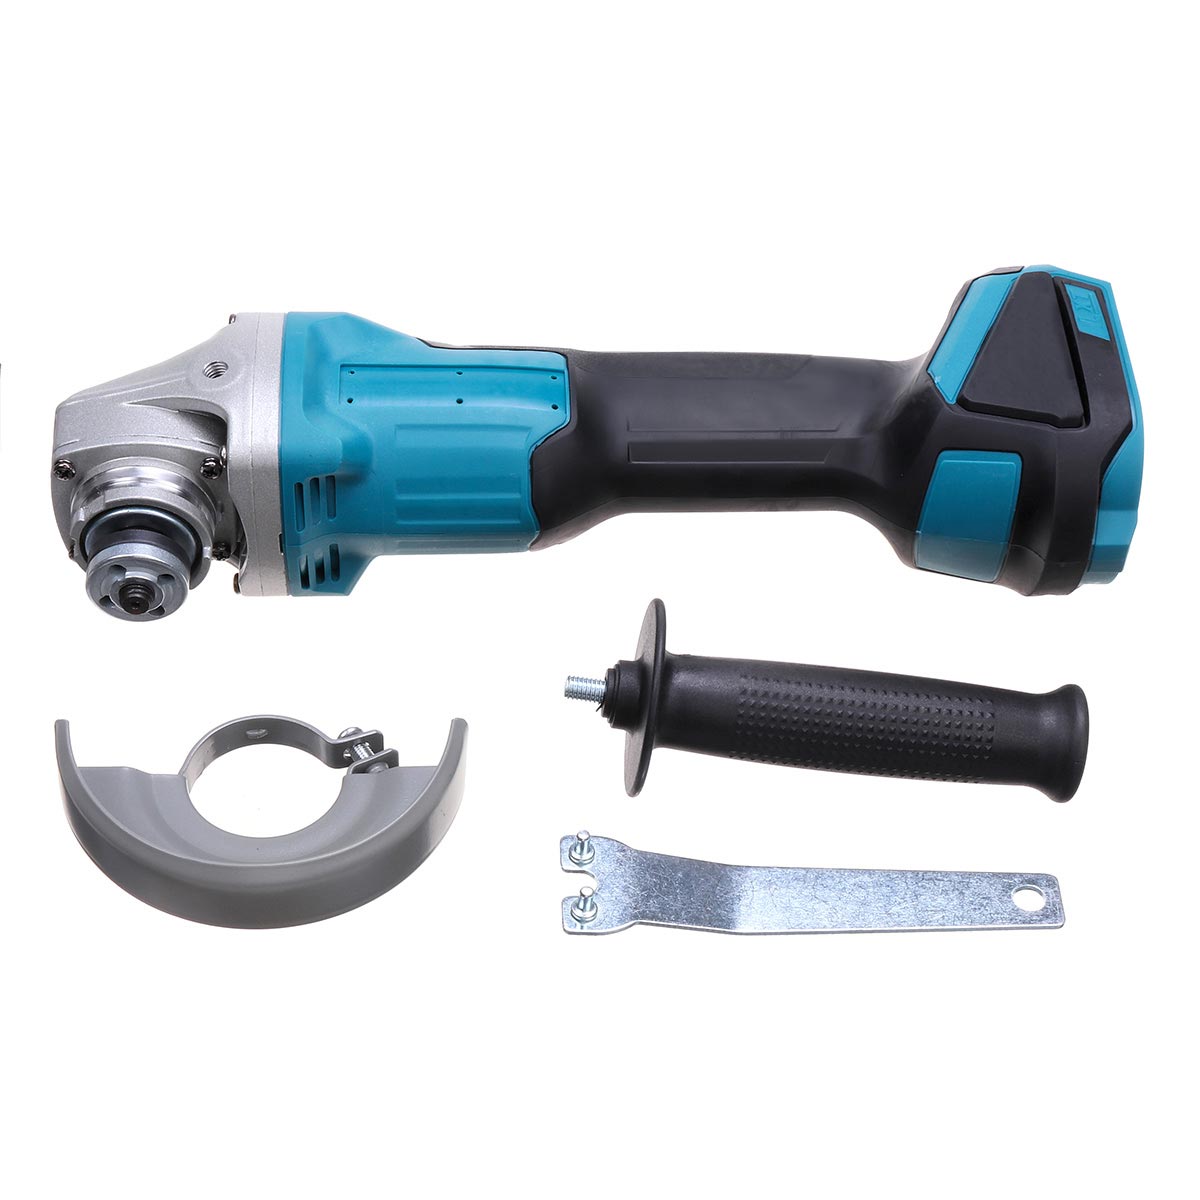 125/100mm Brushless Cordless Angle Grinder 4 Variable Speed Electric Grinding Machine For Makita 18V Battery (Without battery)